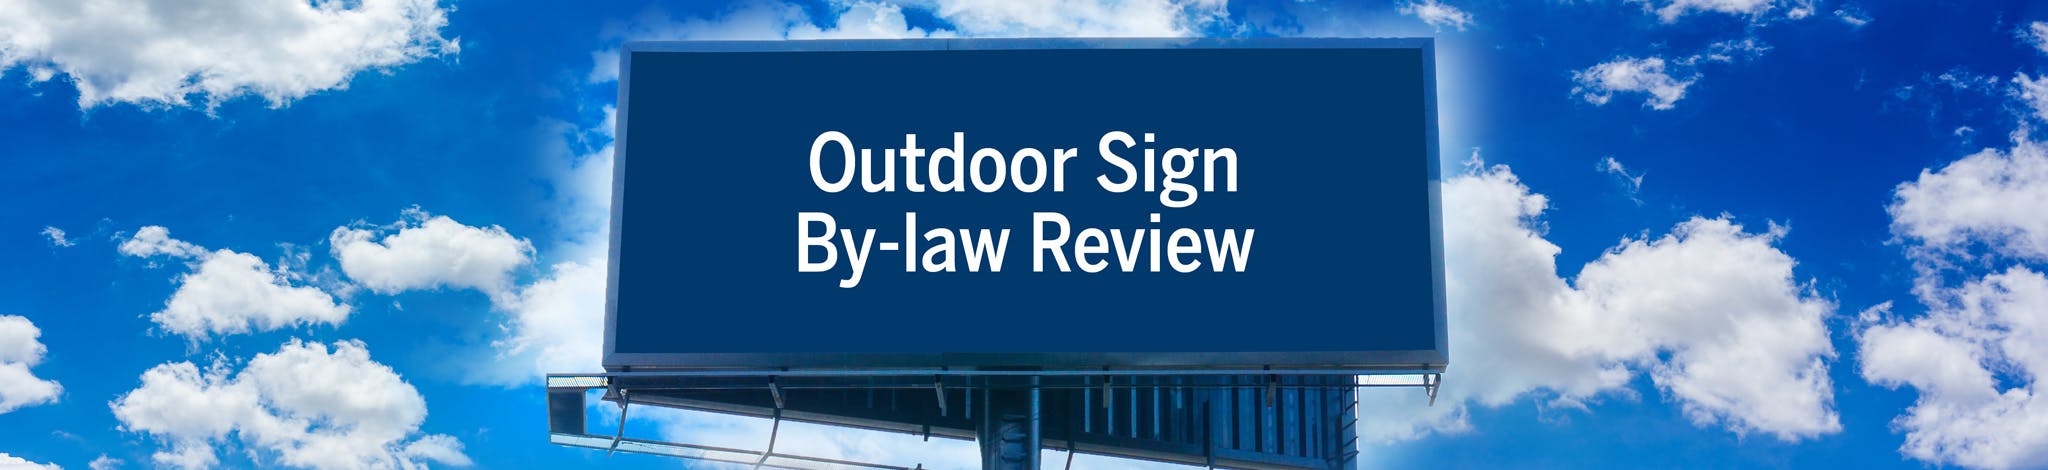 Outdoor Sign by-law Review